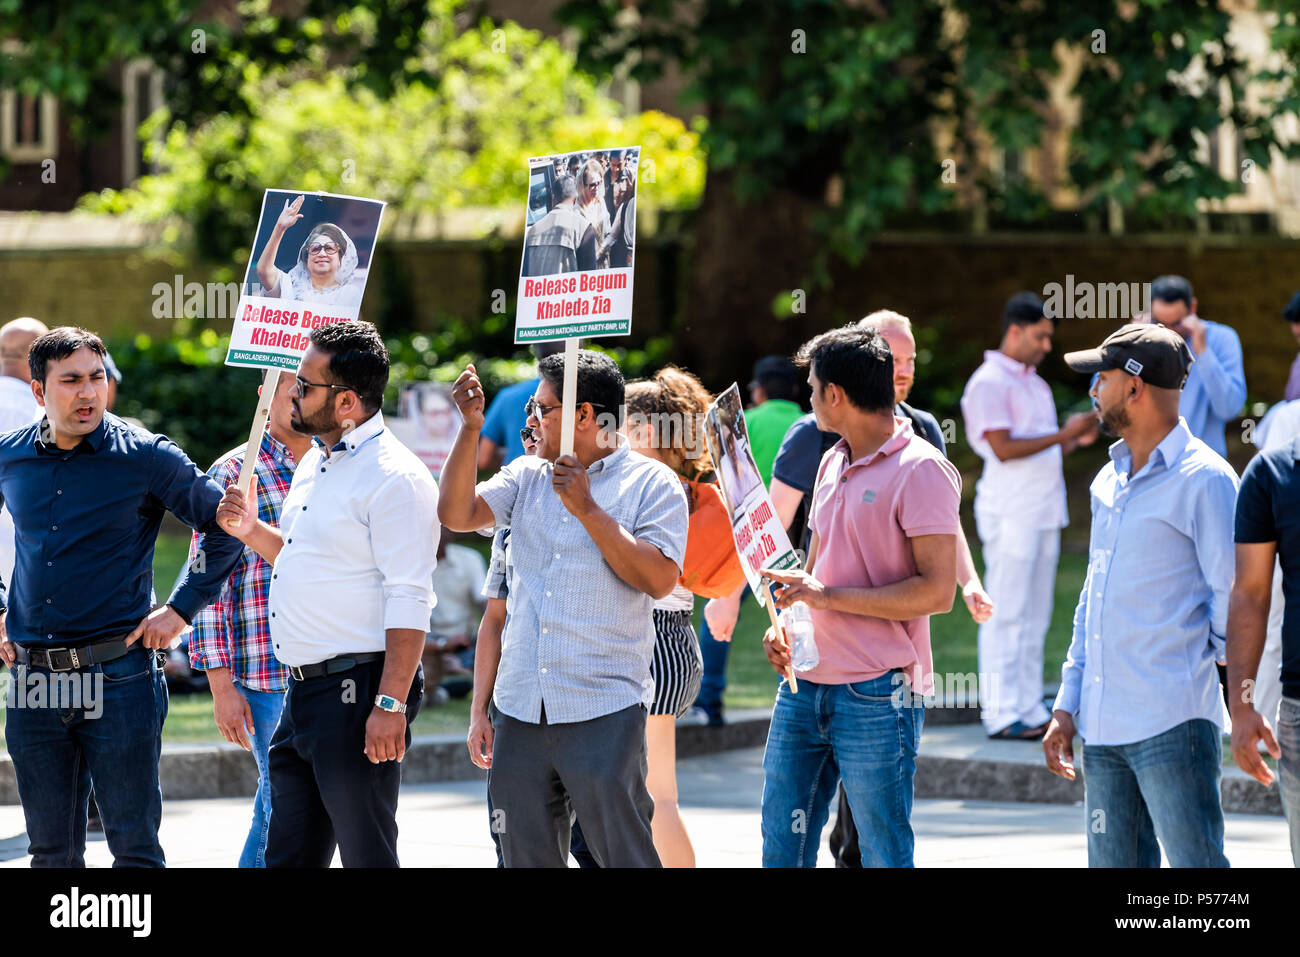 London, United Kingdom - June 25, 2018: People, men closeup at Bangladesh protest in UK England by Westminster with signs for Begum Khaleda Zia, former Nationalist Party leader Credit: Kristina Blokhin/Alamy Live News Stock Photo